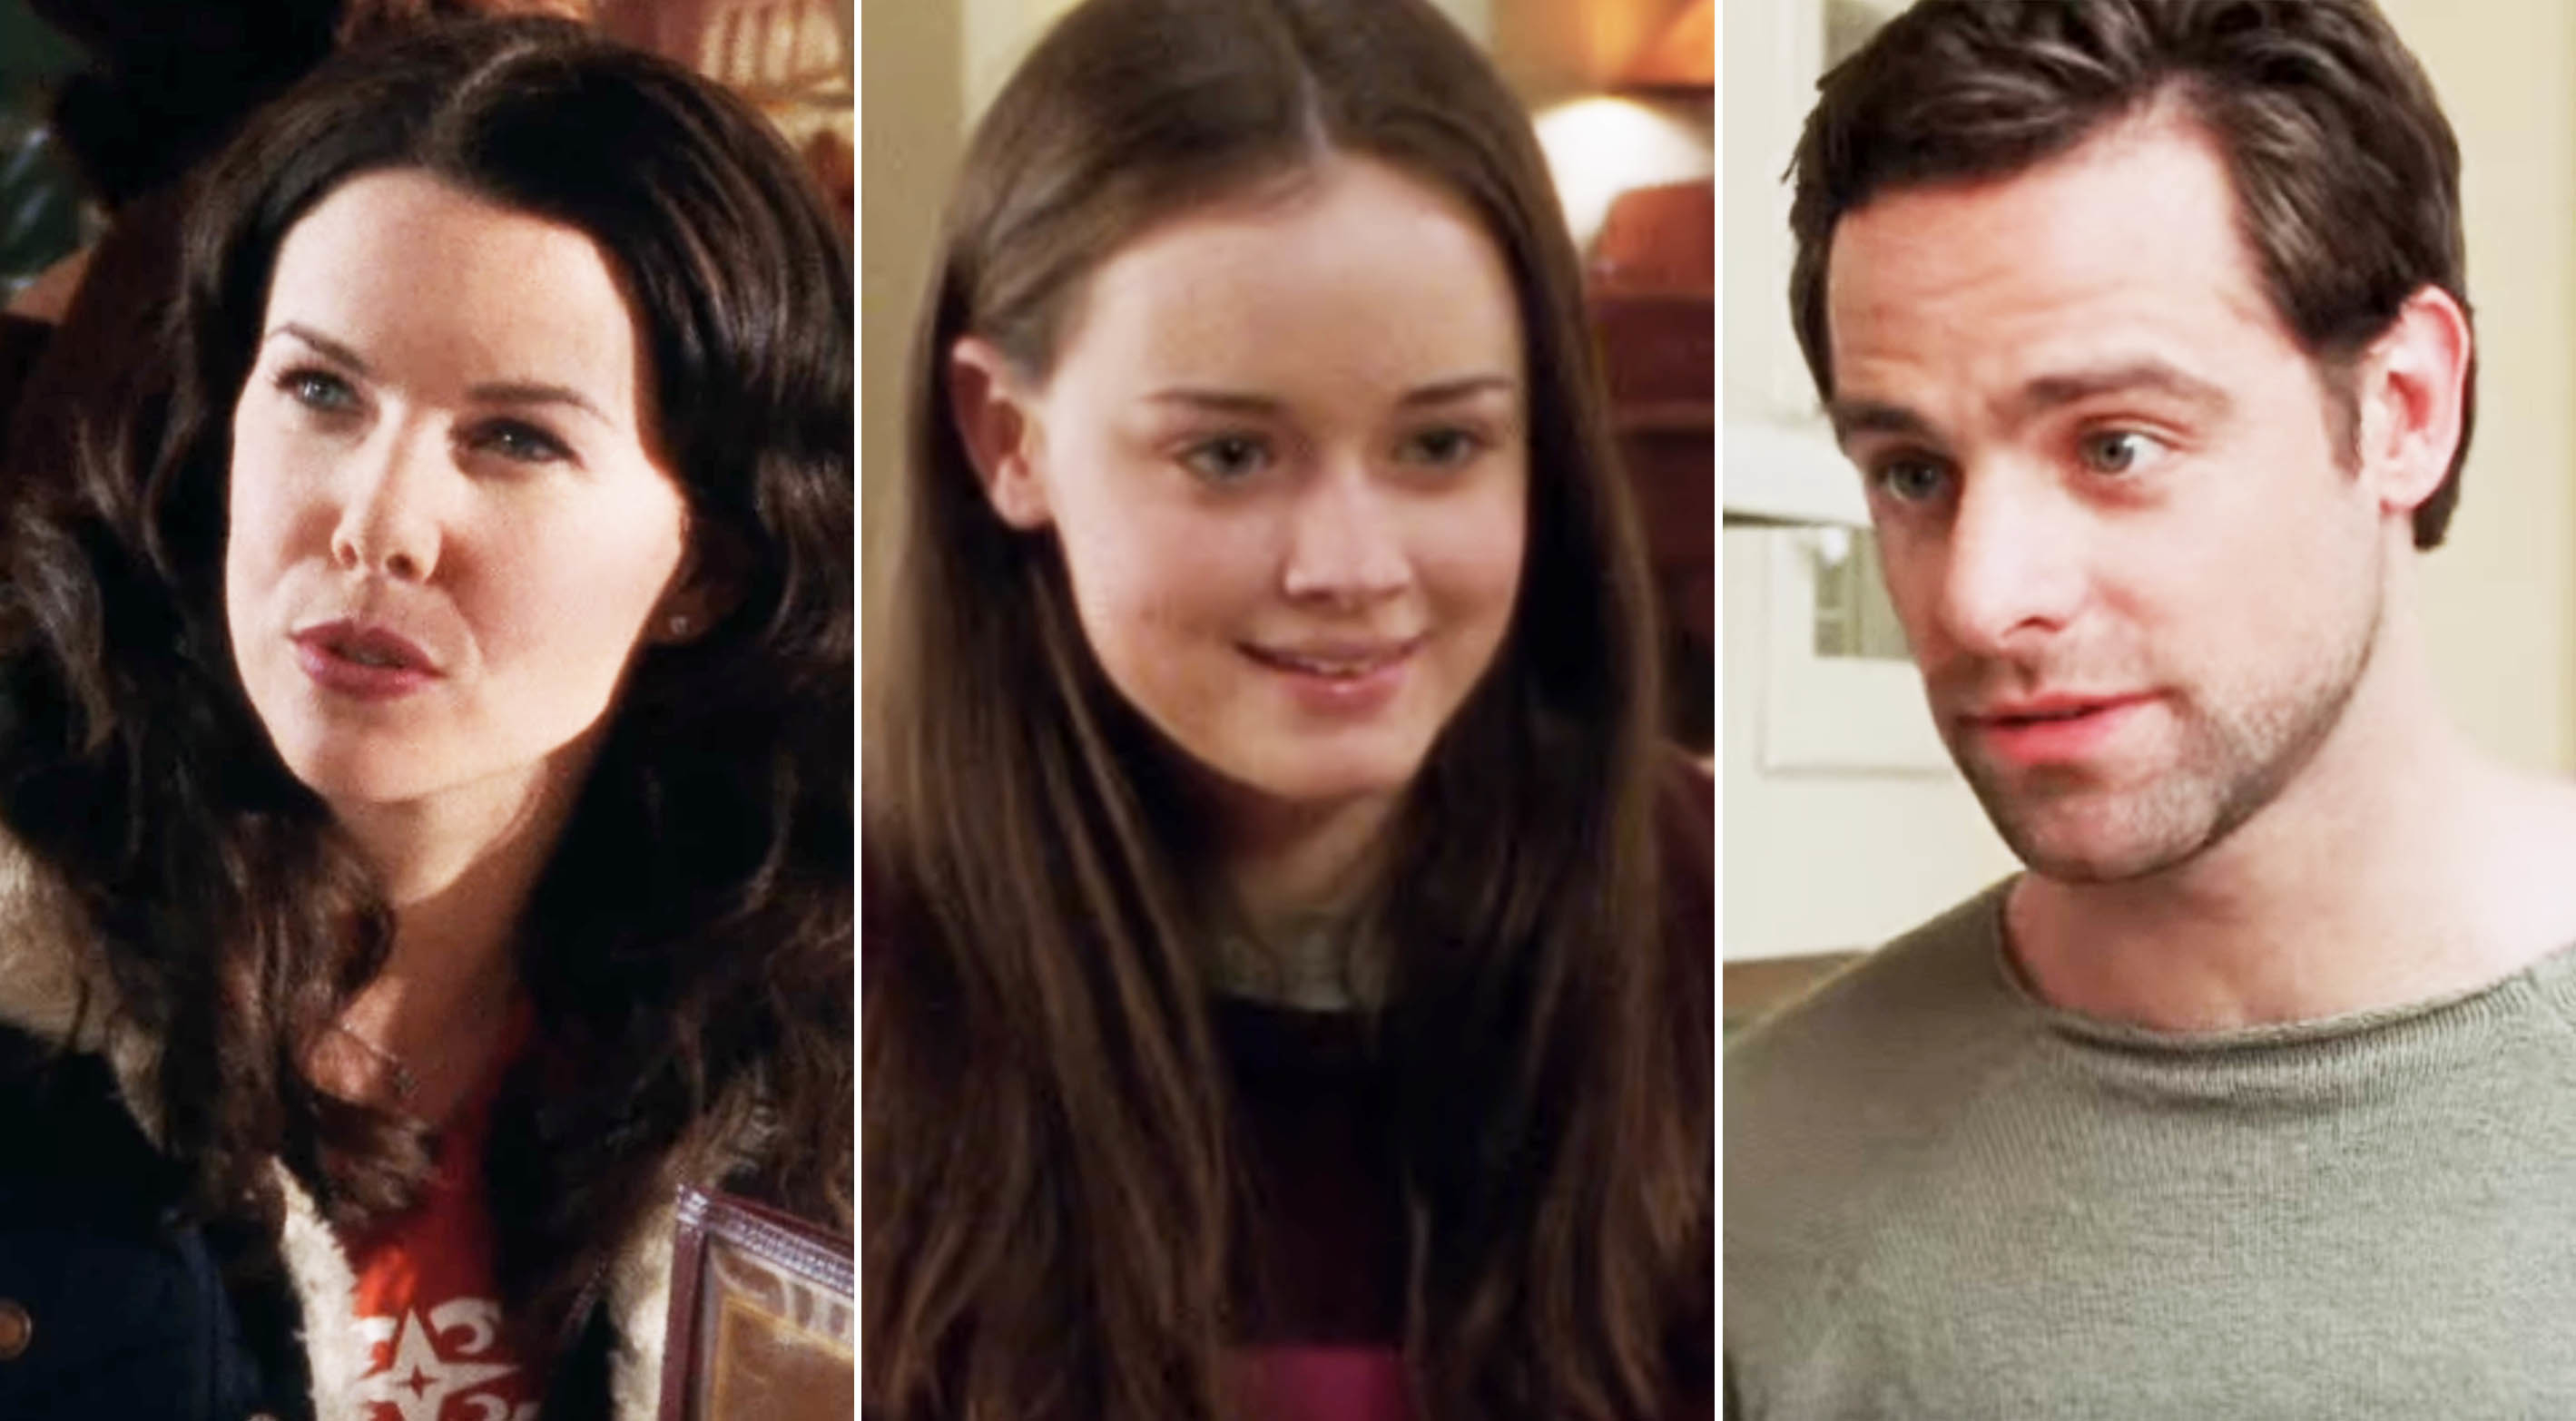 Lorelai, Rory, and Christopher